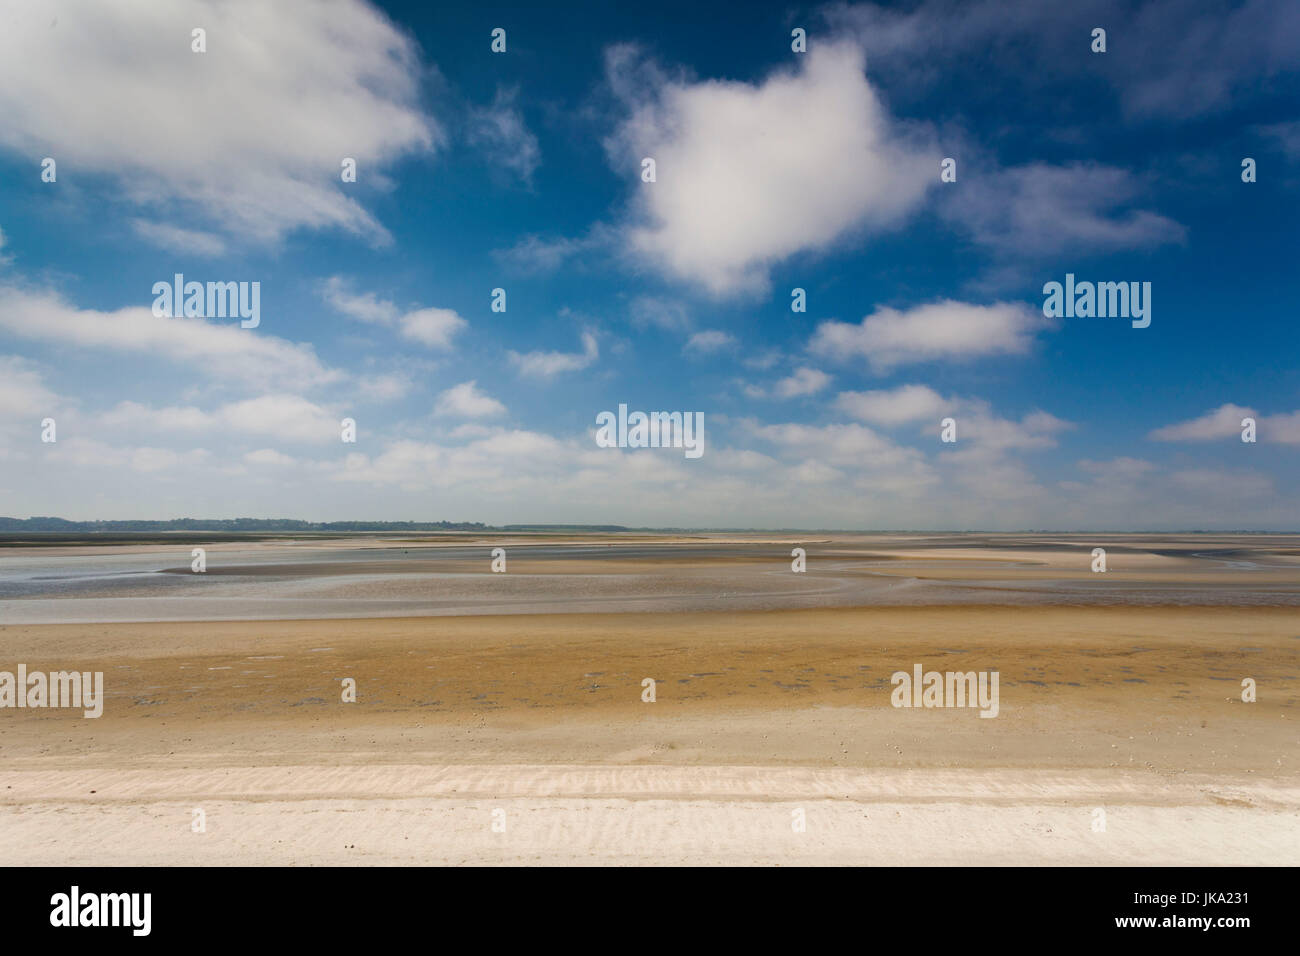 France, Picardy Region, Somme Department, Le Crotoy, Somme Bay resort town, view of La Baie de Somme Stock Photo